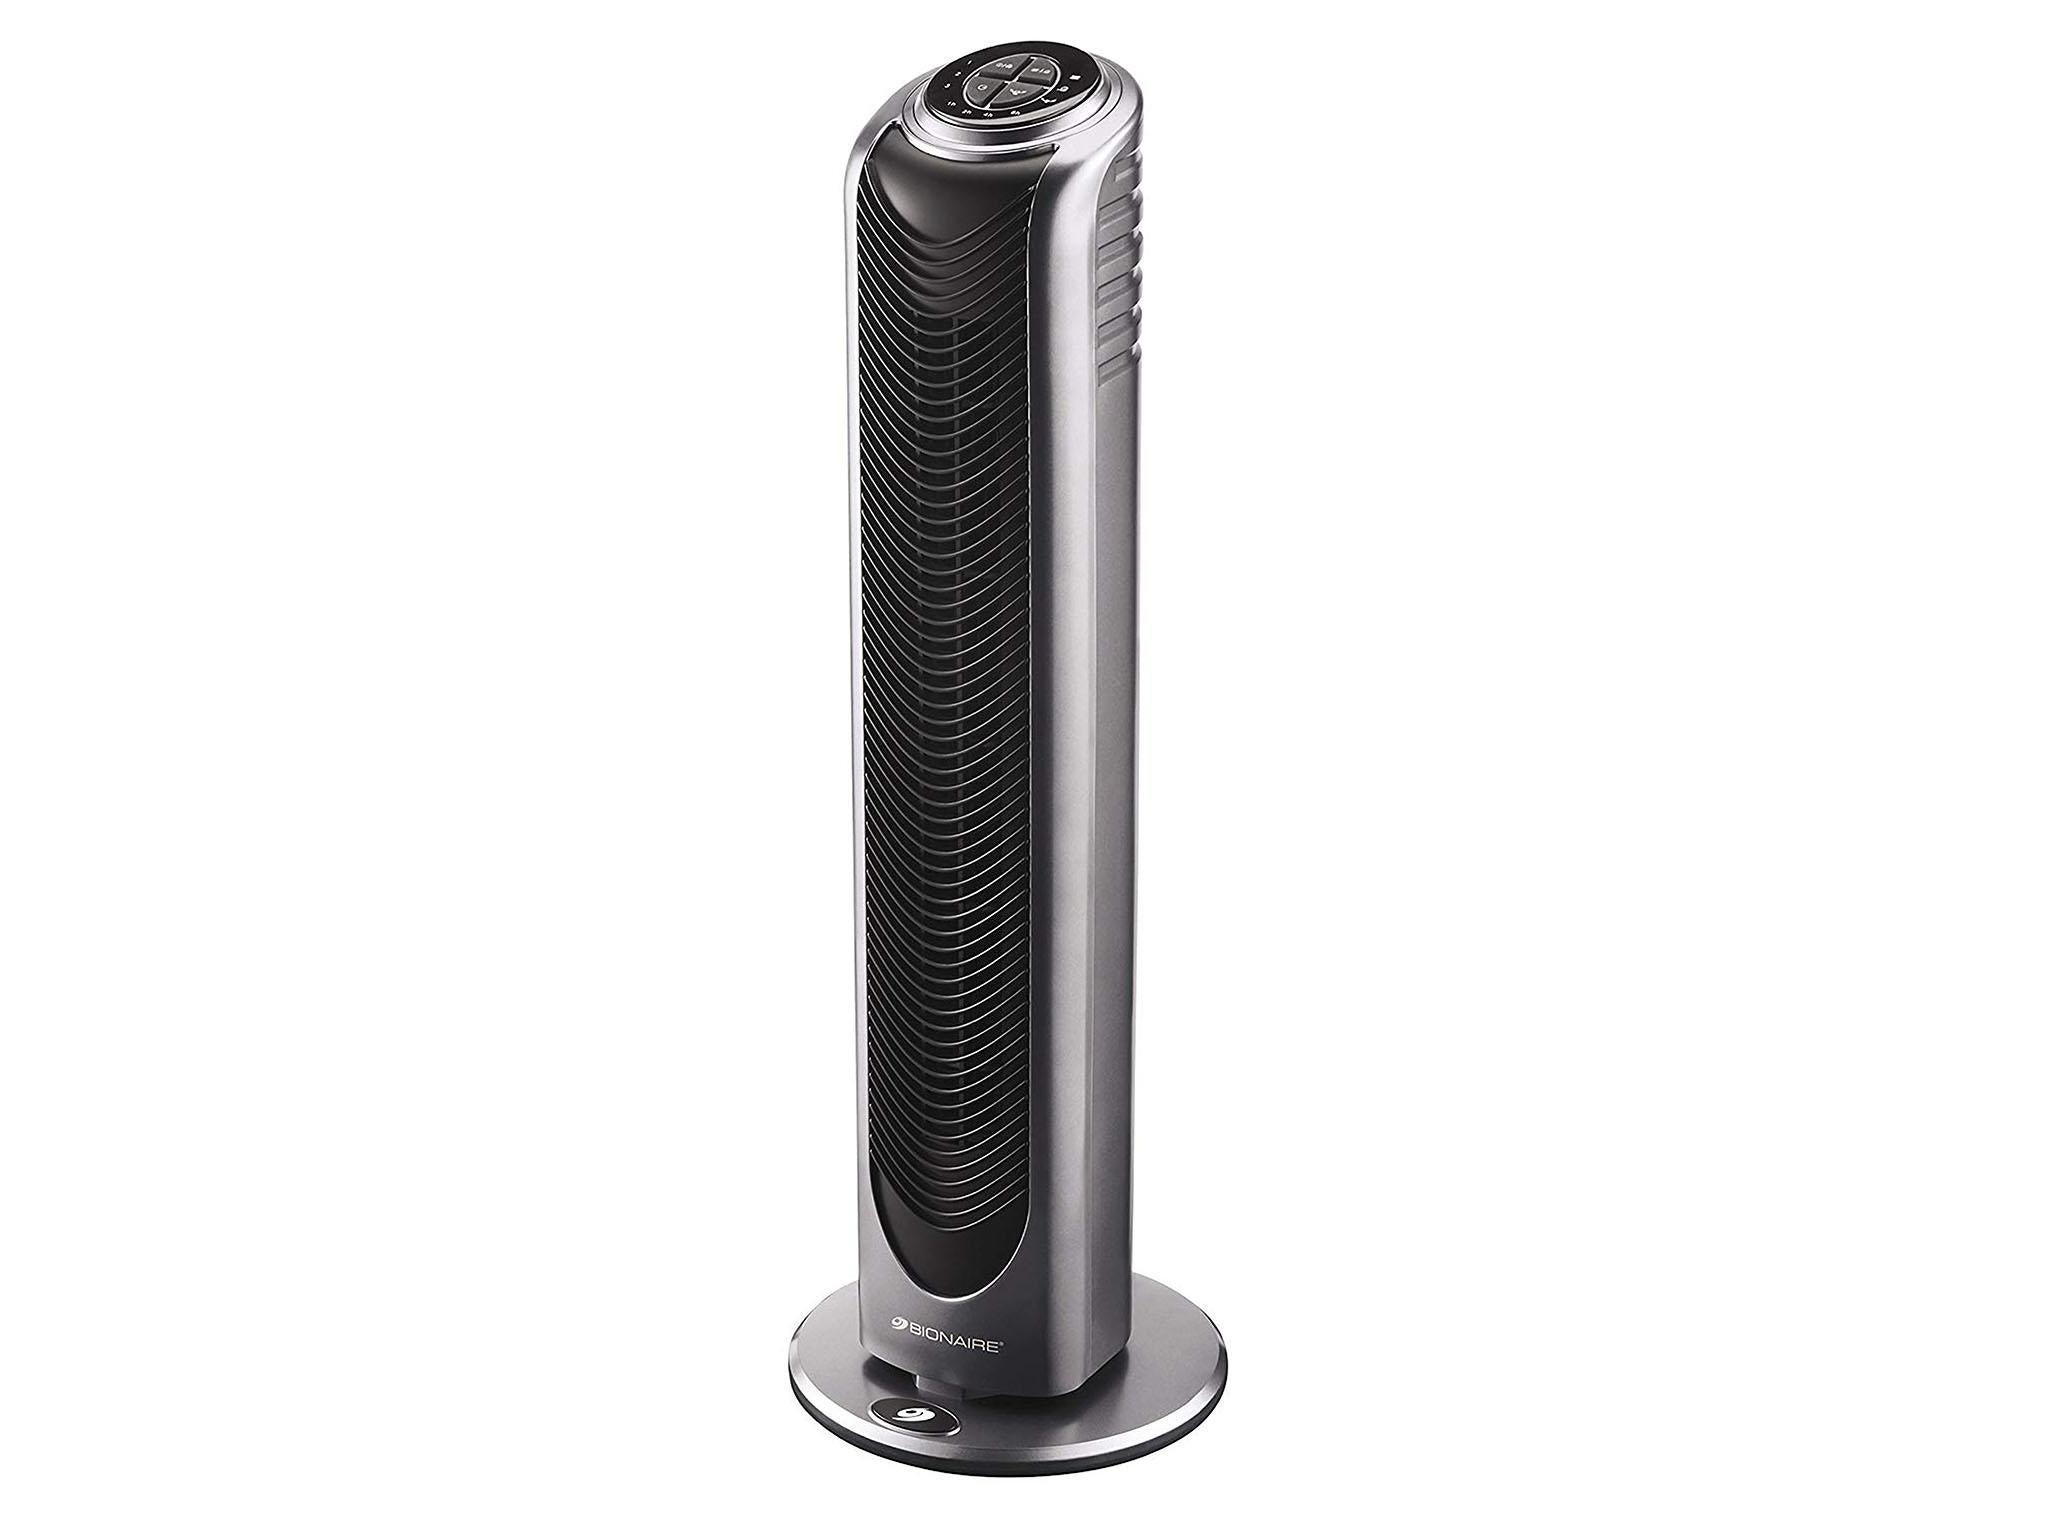 Httpsstaticindependentcouks3fs Publicthumbnailsimage2019060510bionaire Ocillating Tower Fan With Remote Control And Timer in dimensions 2048 X 1536